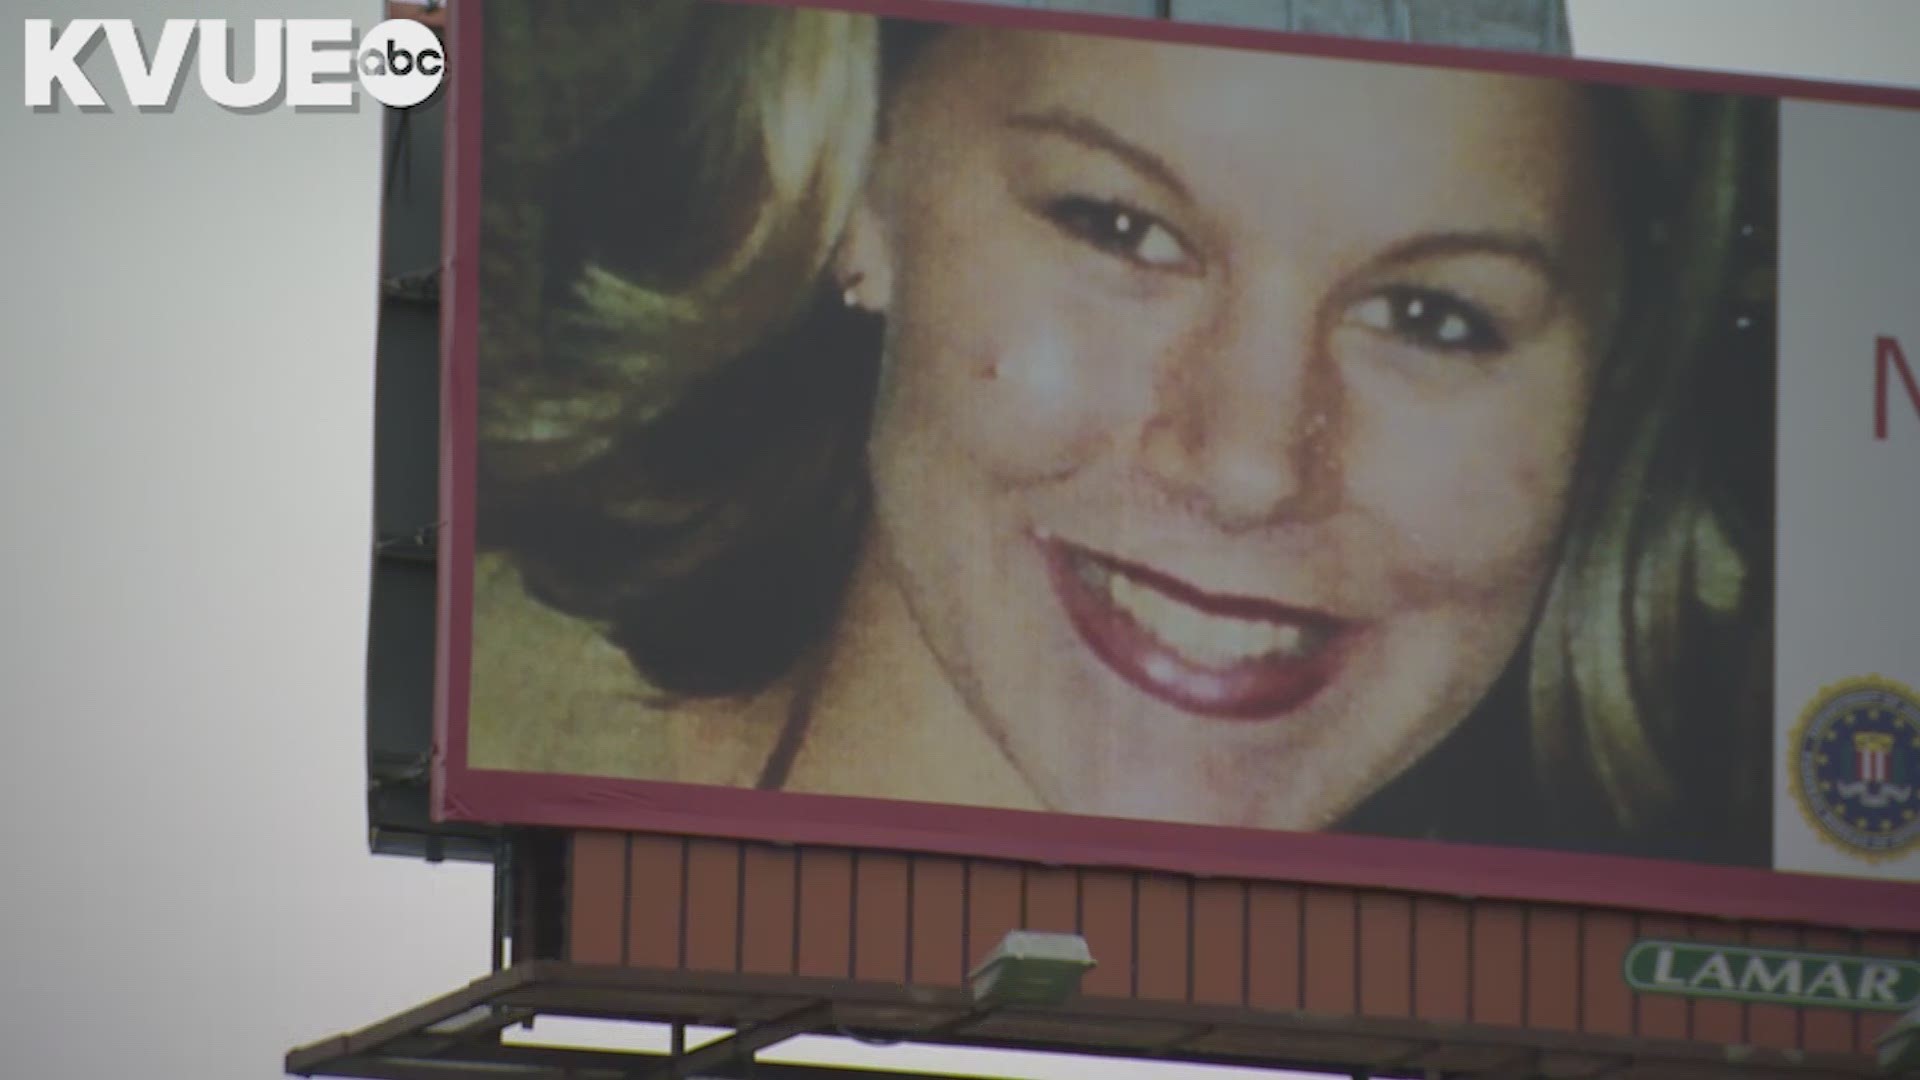 Billboards have gone up in the area on Rachel Cooke's birthday. She has been missing more than 17 years.